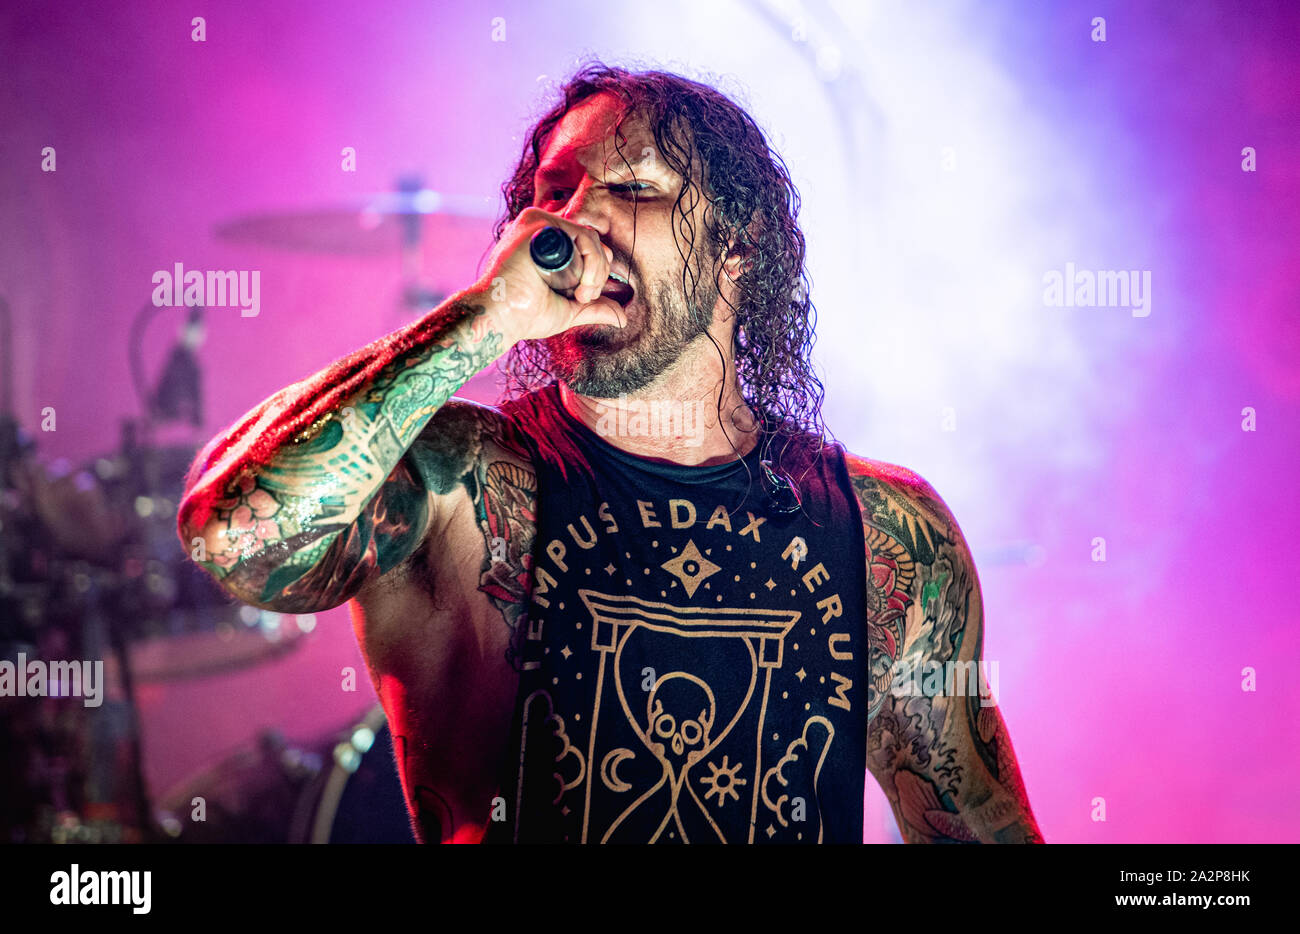 Copenhagen Denmark 02nd Oct 19 The American Heavy Metal Band As I Lay Dying Performs A Live Concert At Amager Bio In Copenhagen Here Vocalist Tim Lambesis Is Seen Live On Stage